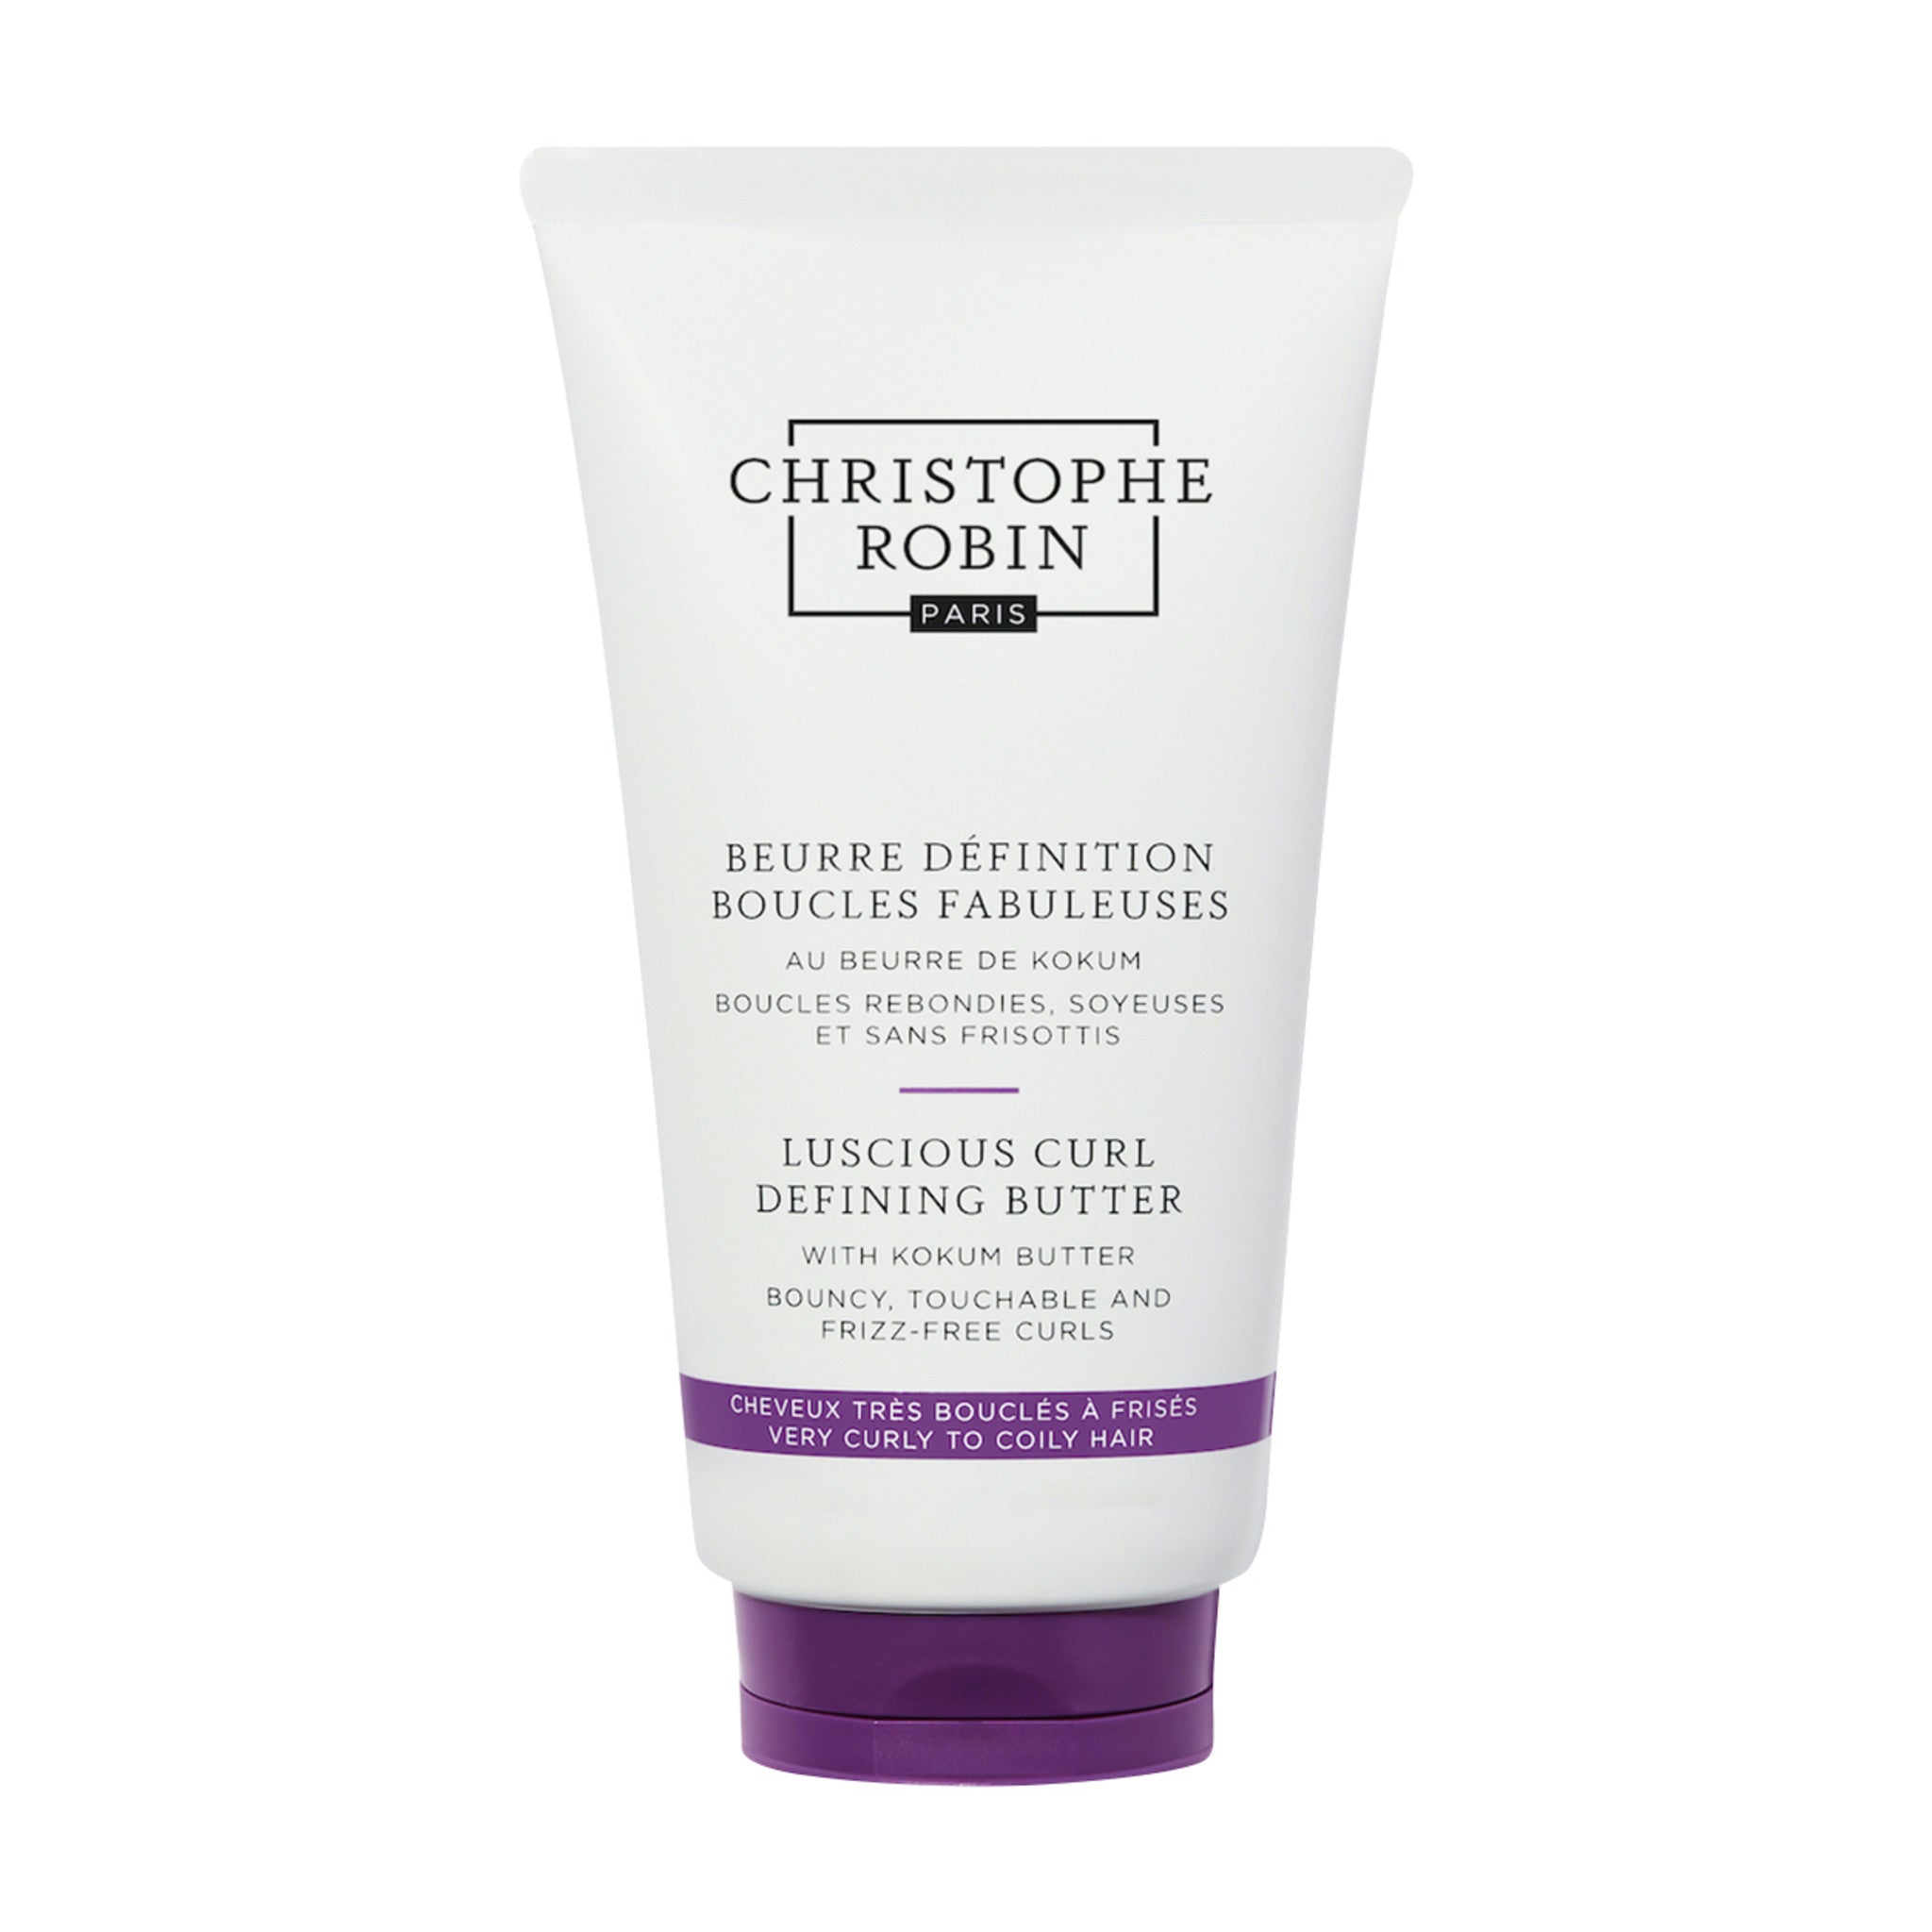 Christophe Robin Luscious Curl Defining Butter main image.